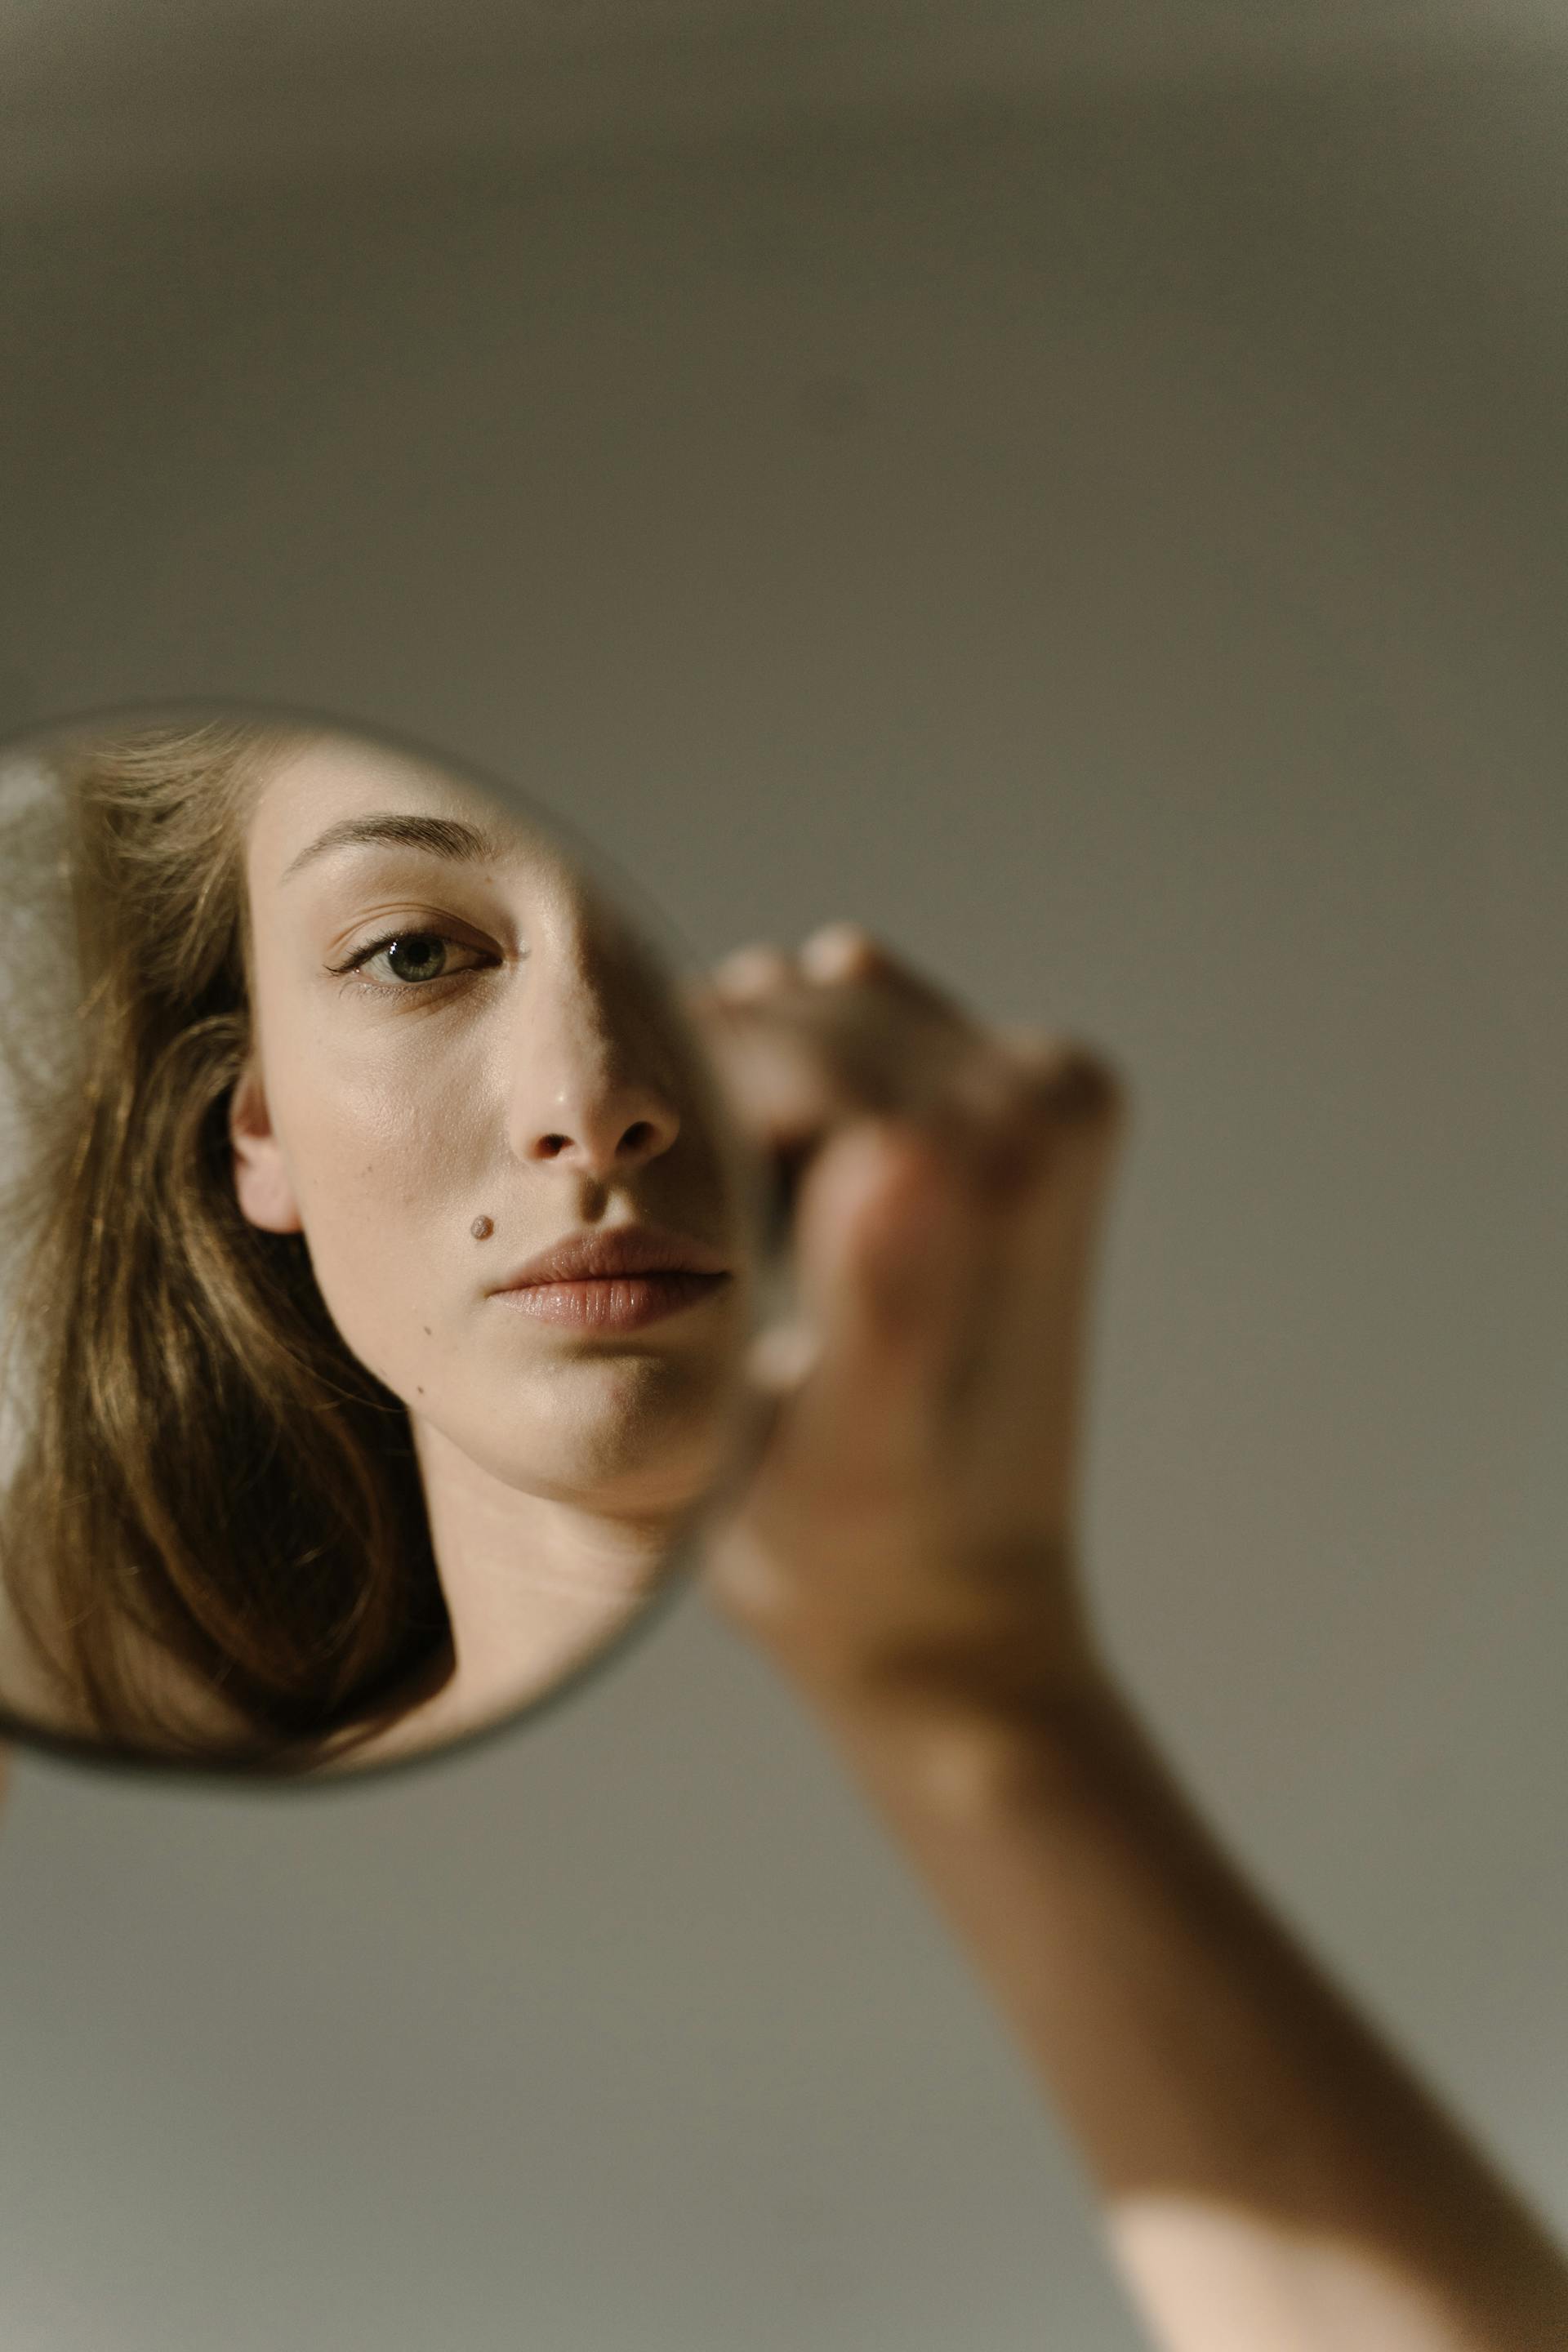 A woman looking in a mirror | Source: Pexels